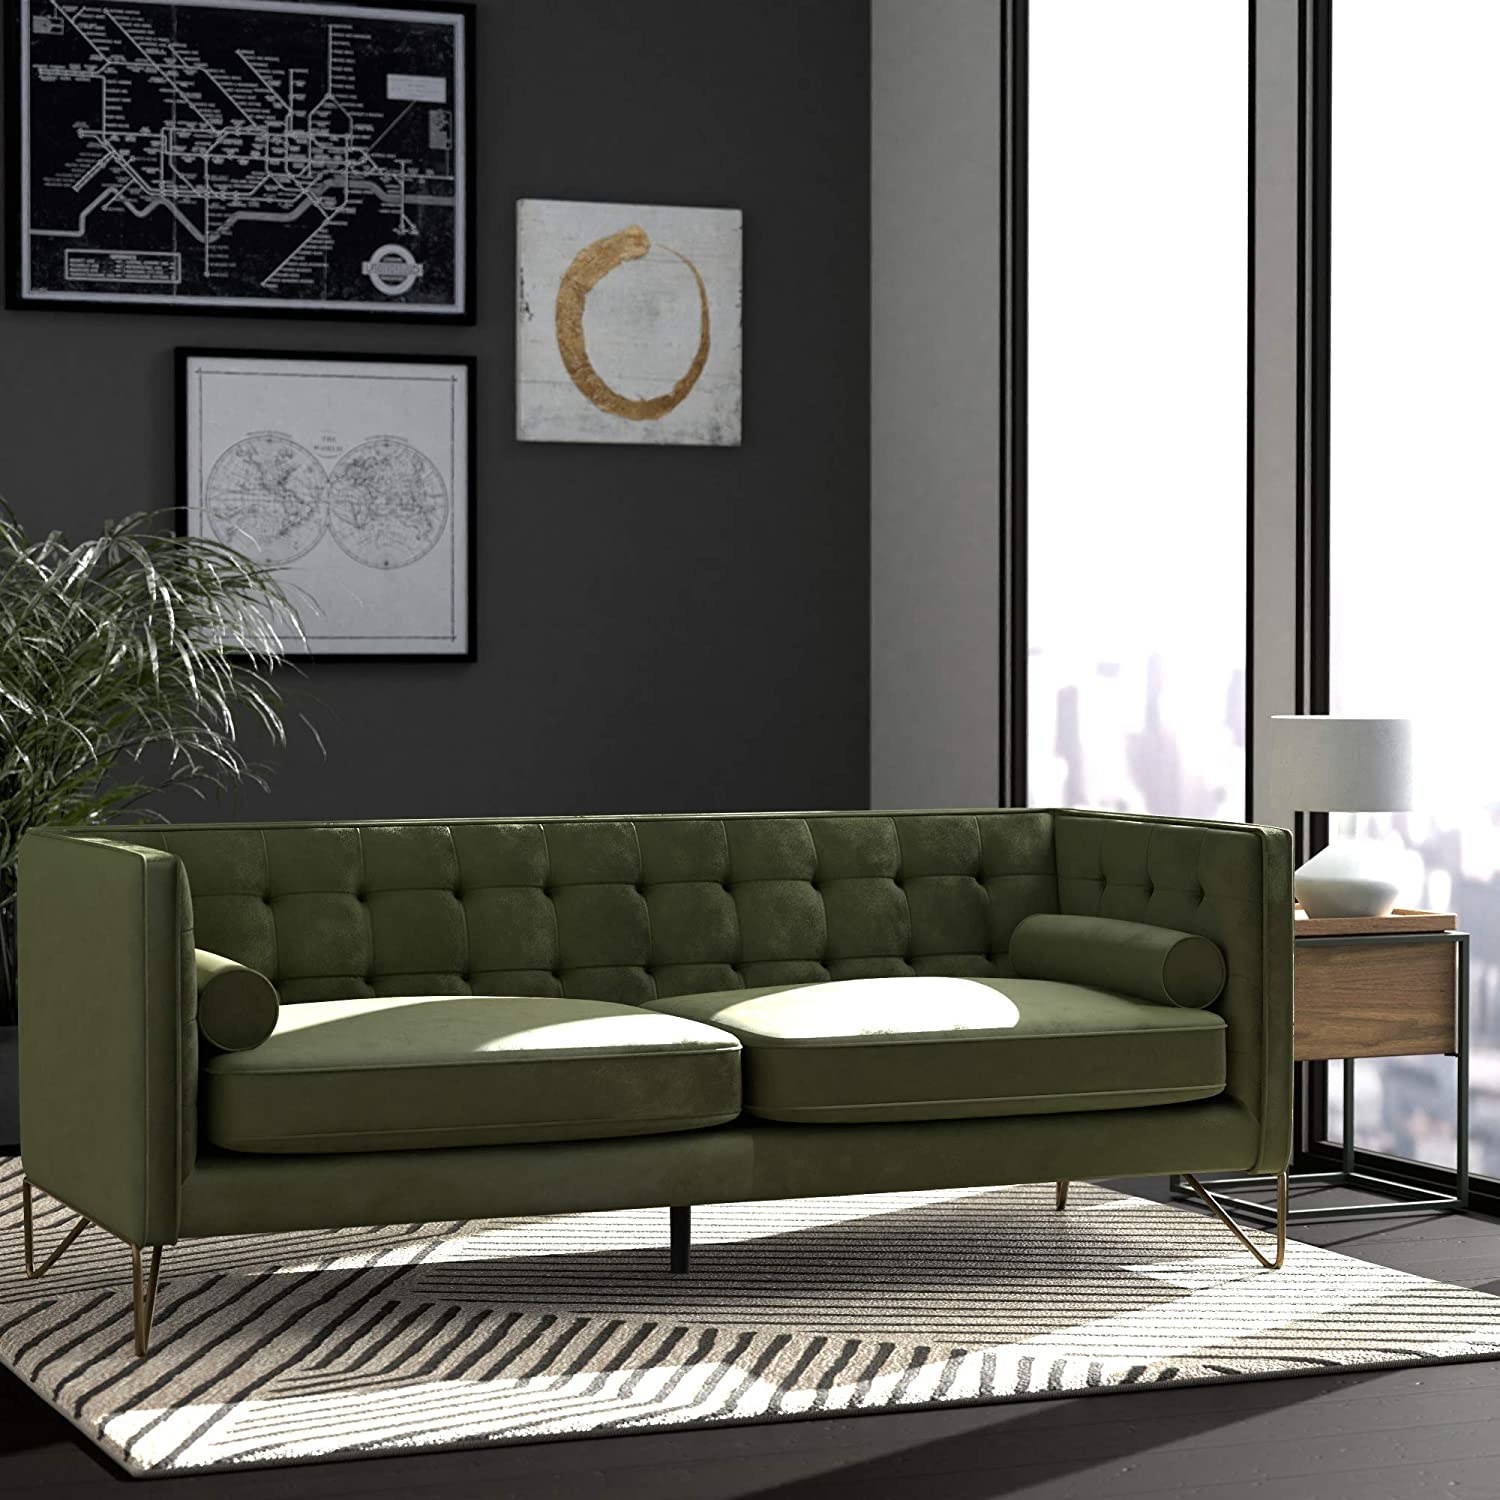 A green couch in a home